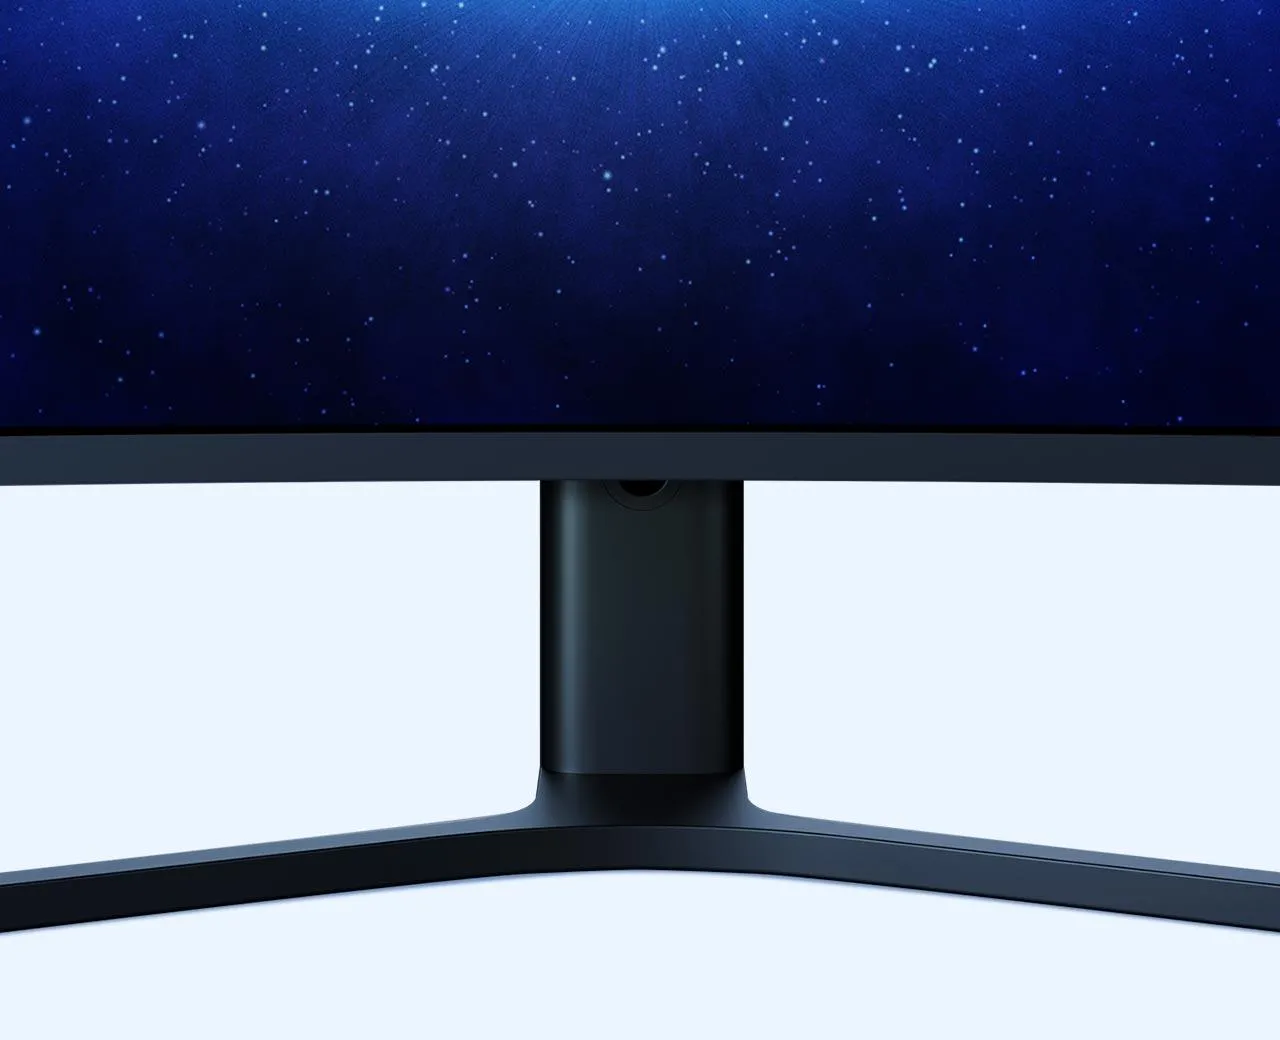 Xiaomi Curved Gaming Monitor 34